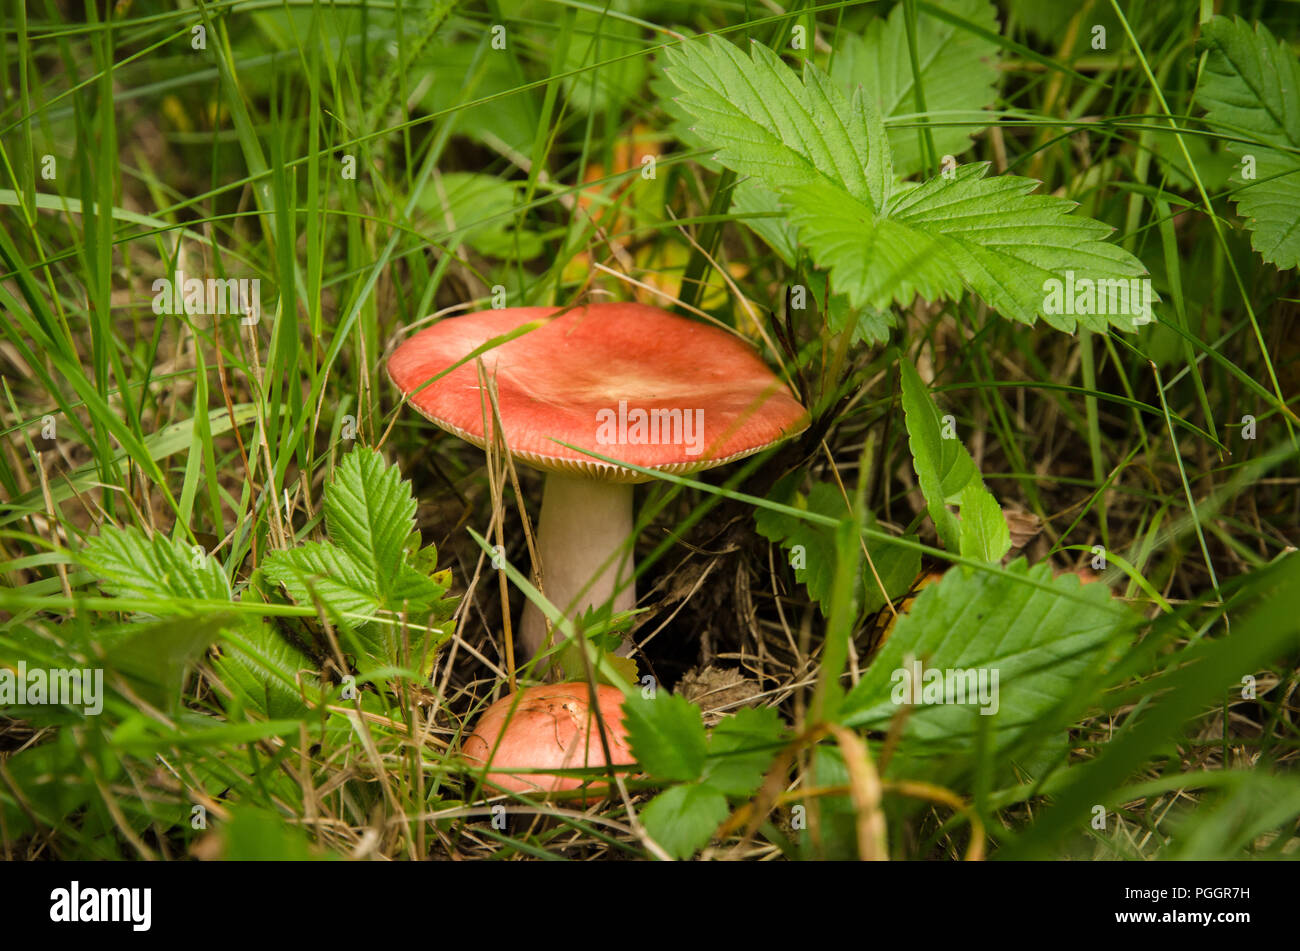 red russula mushroom at autumn time Stock Photo